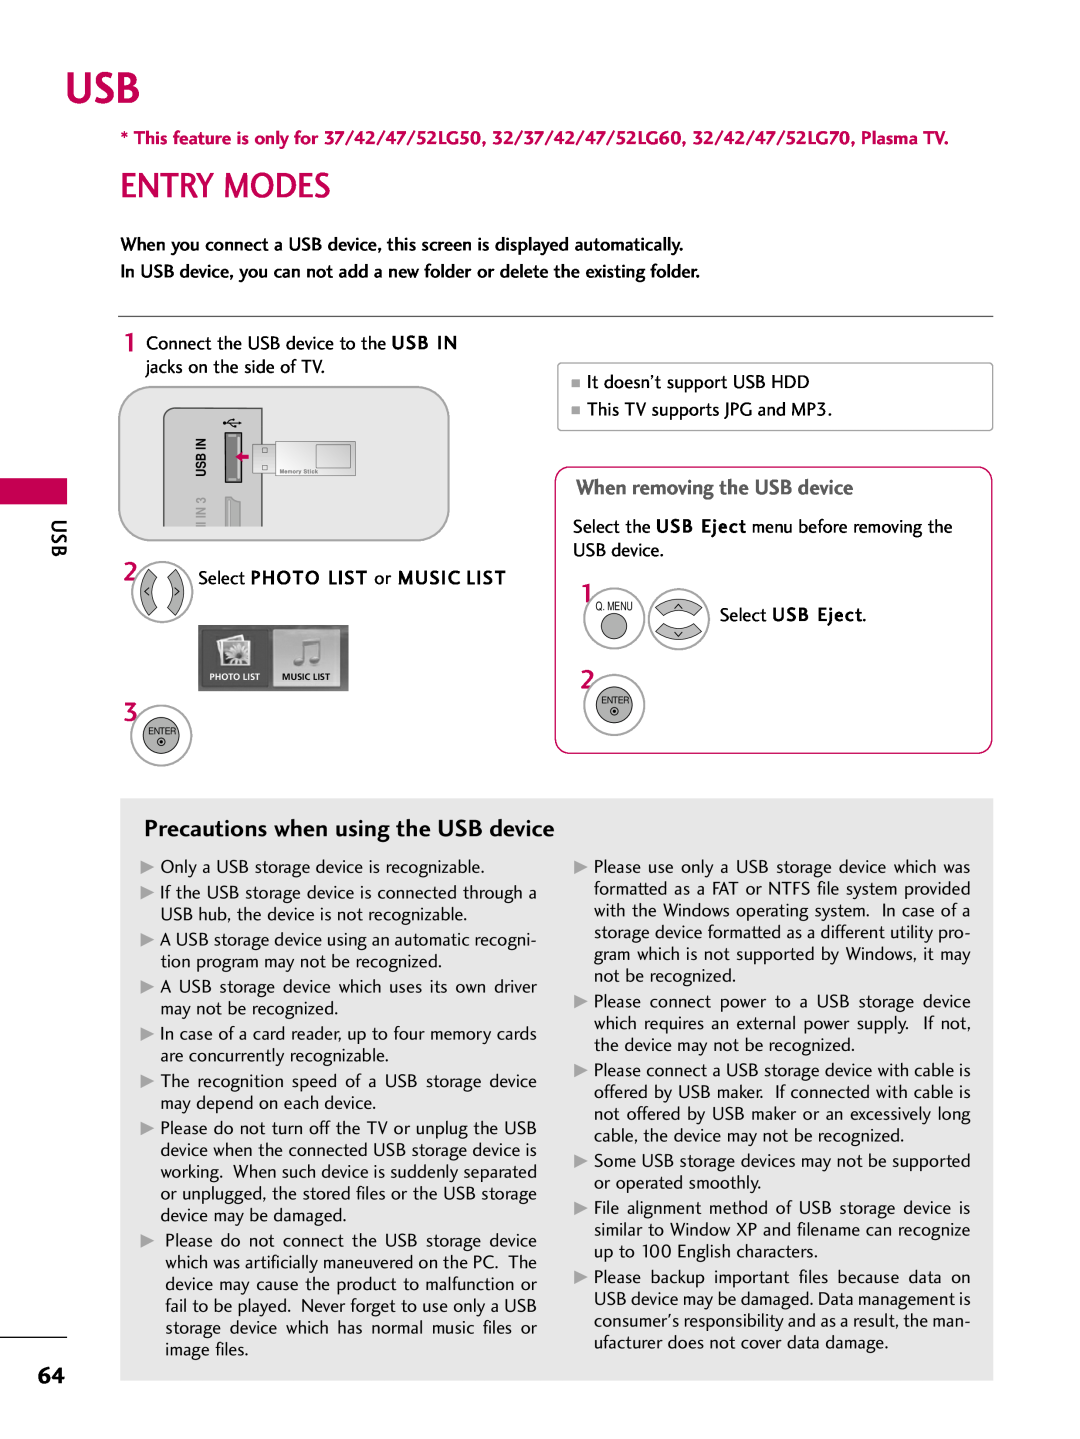 LG Electronics 4230, 60PG60, 5270, 5260 Entry Modes, Precautions when using the USB device, When removing the USB device 